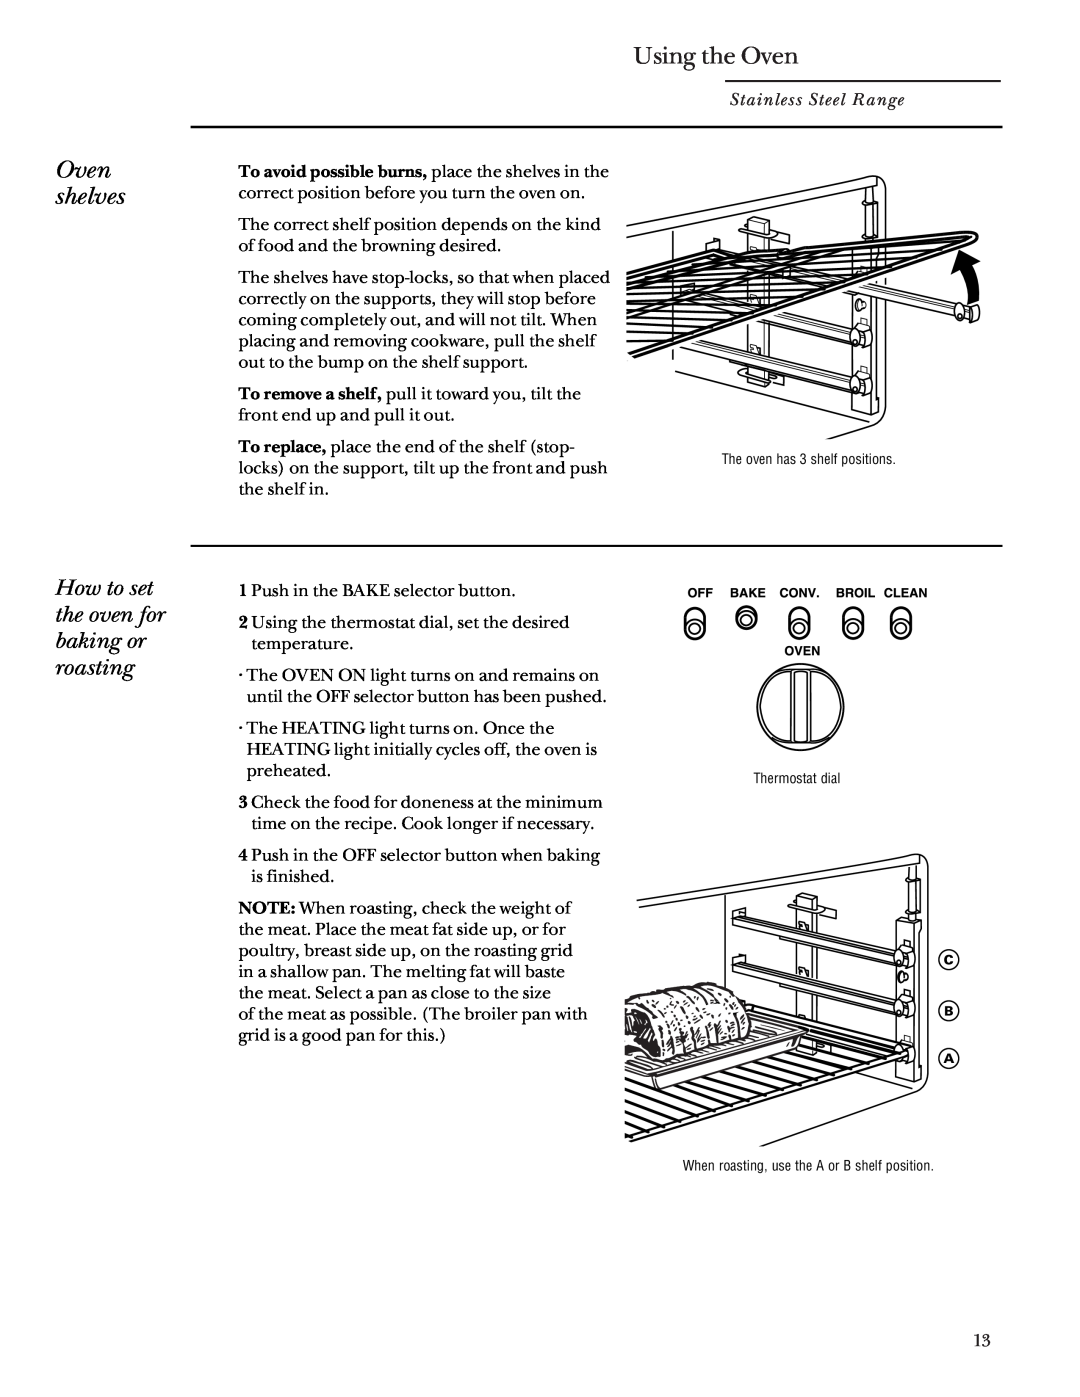 GE Monogram 164D4290P031 owner manual Oven shelves, Using the Oven, How to set the oven for baking or roasting 